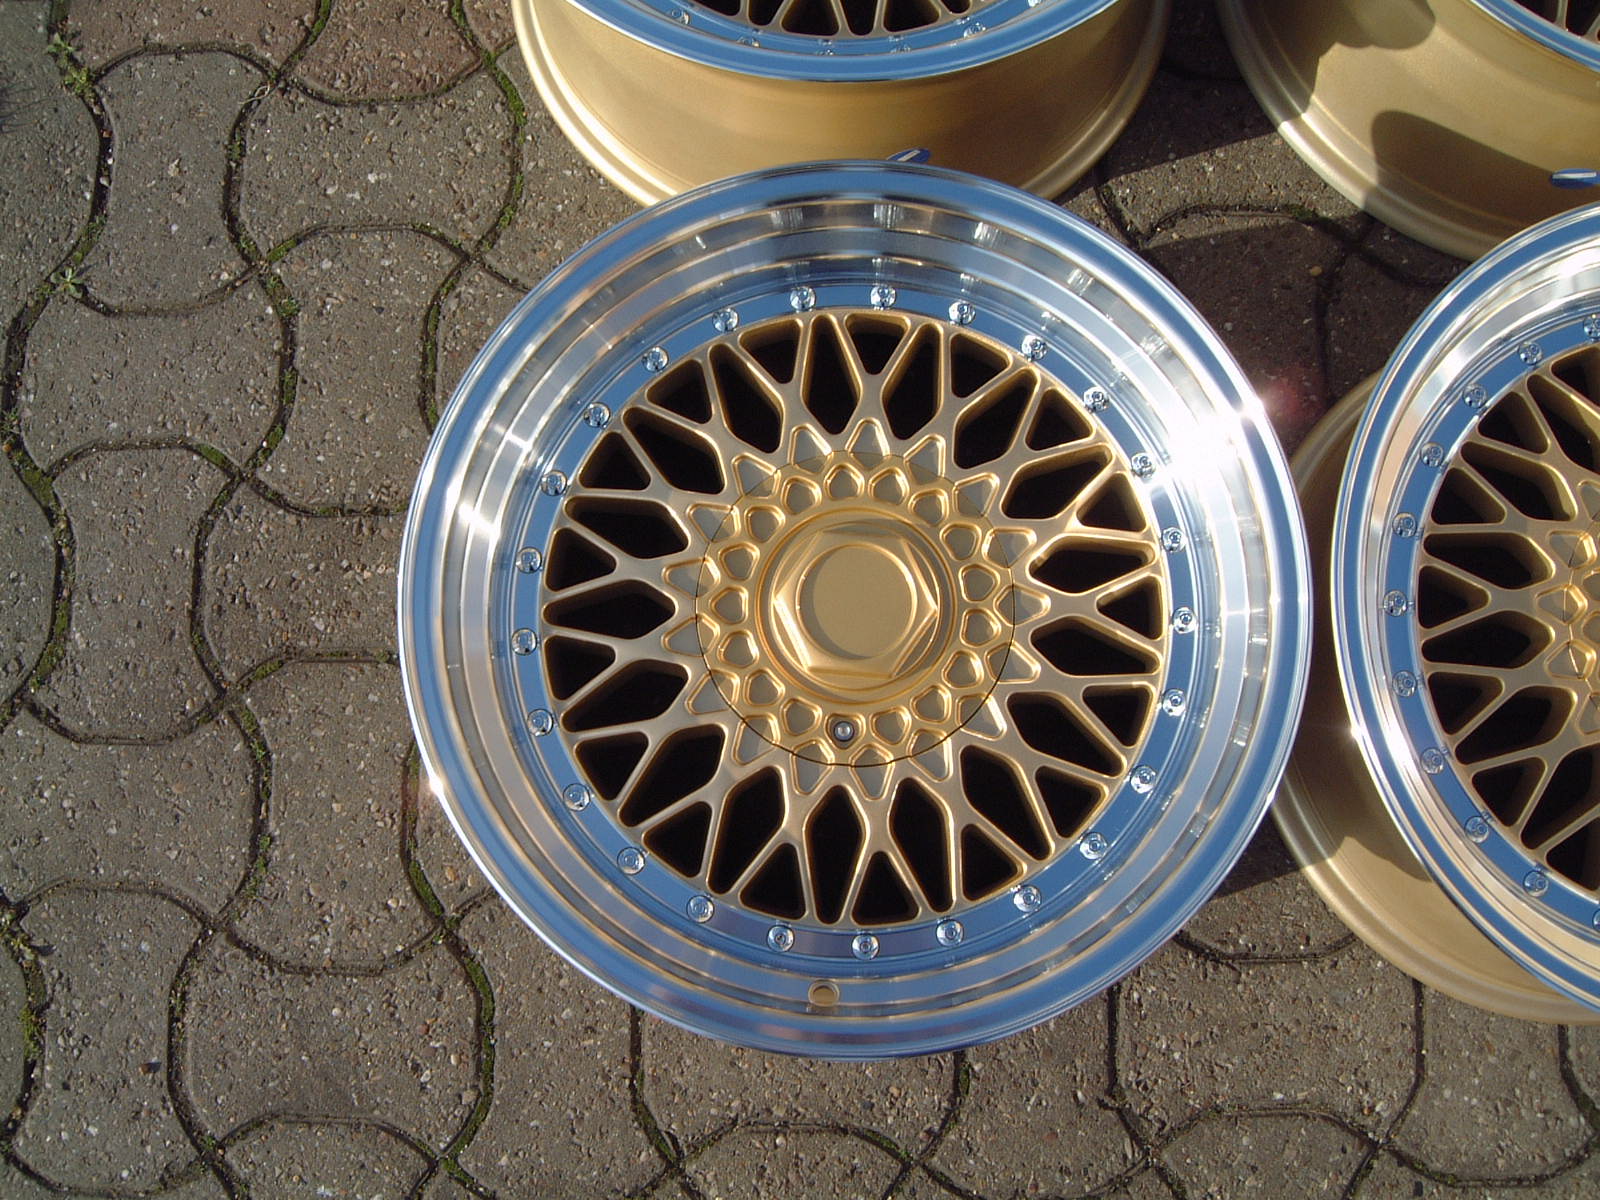 NEW 15  DARE RS ALLOY WHEELS IN MOTORSPORT GOLD  DEEP DISH 8  REAR